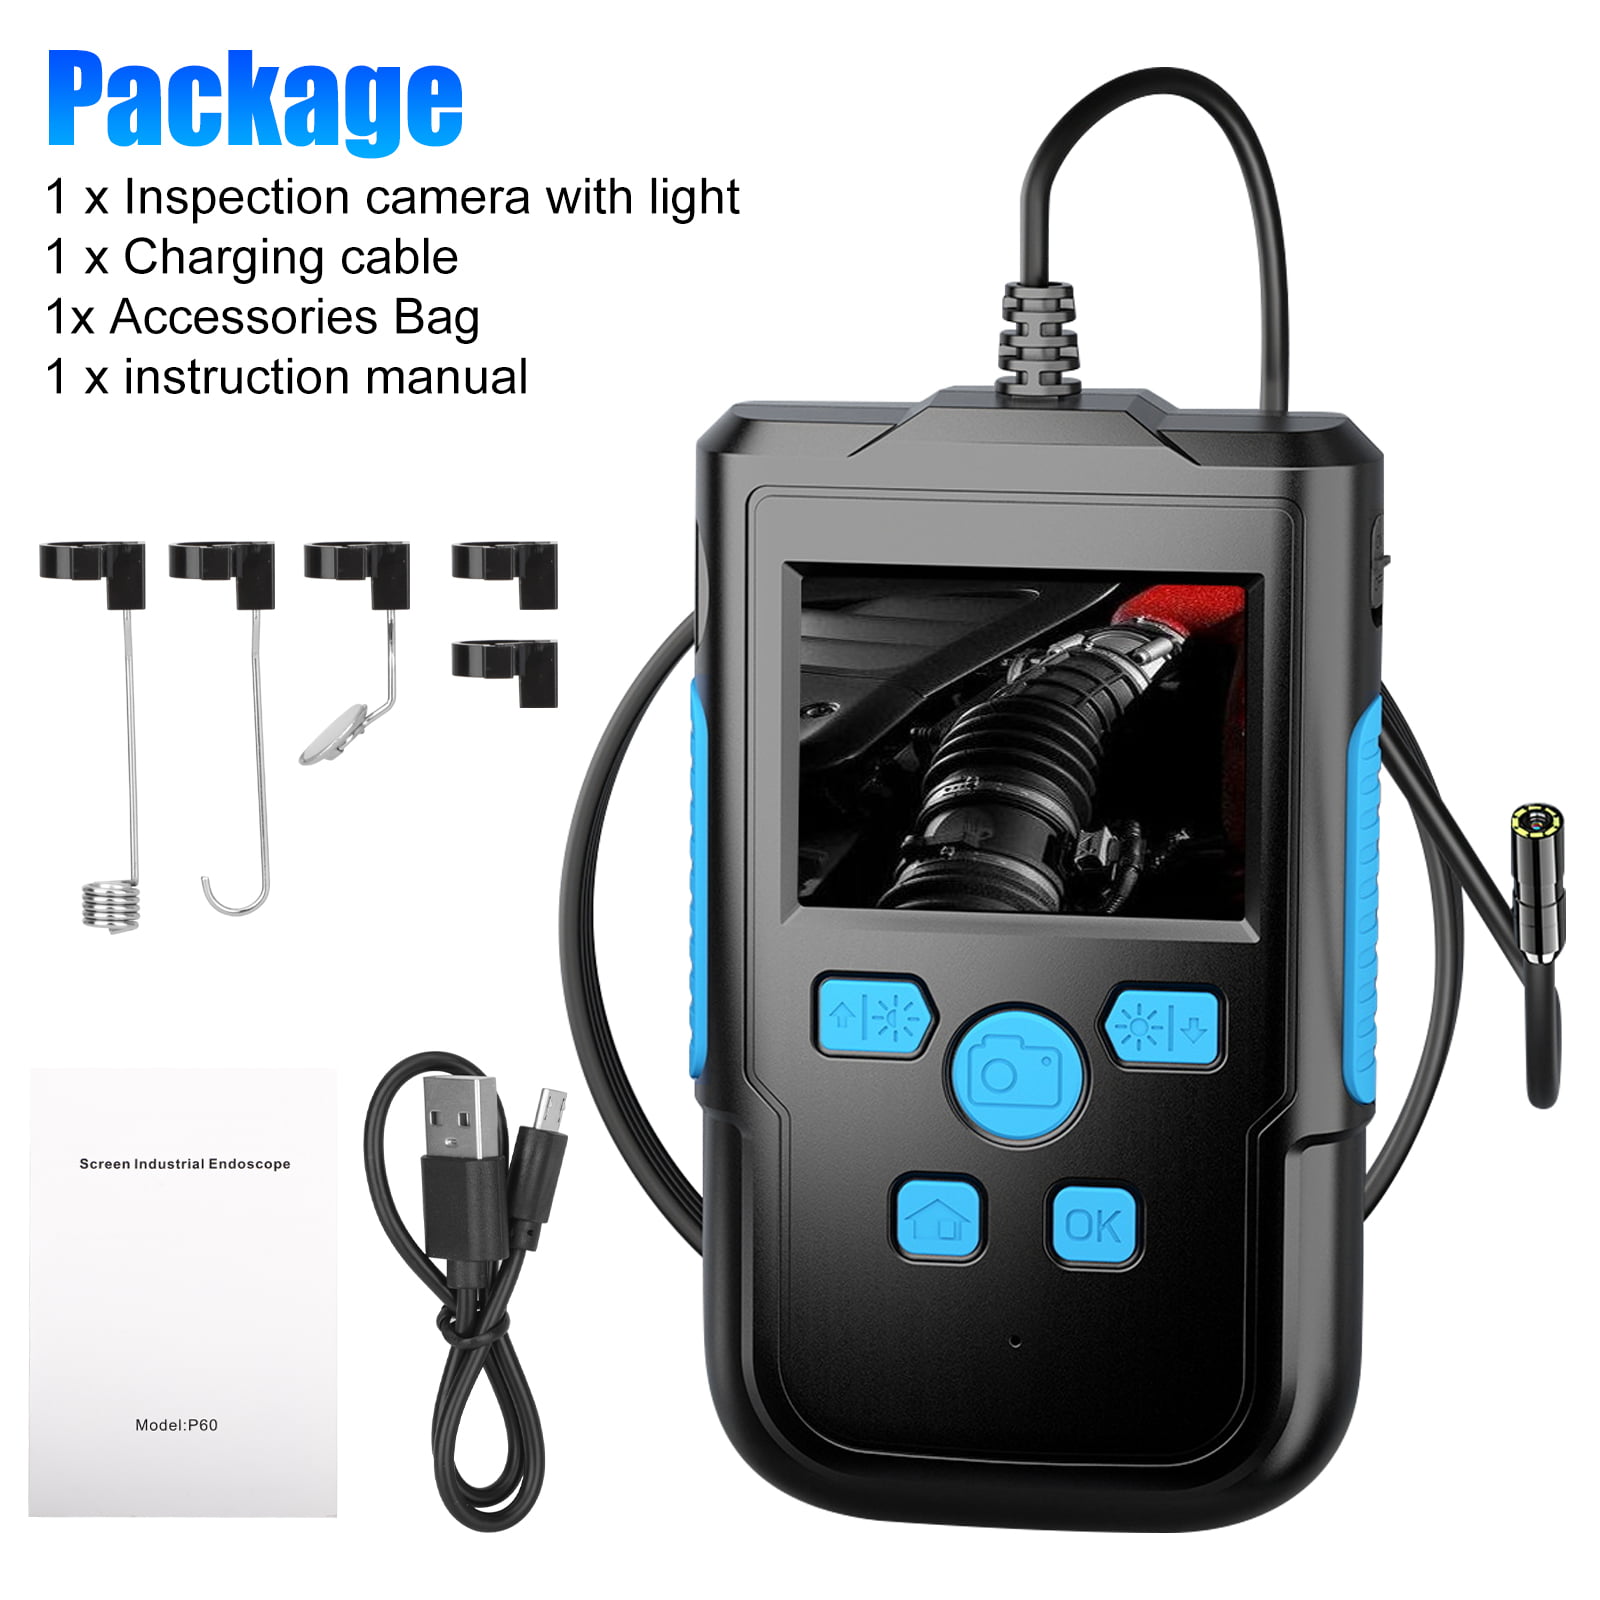 TSV Industrial Endoscope, 1080P HD Borescope Snake Inspection Camera with  4.3'' Screen, 8 LED Lights, 6.6' Flexible Cable